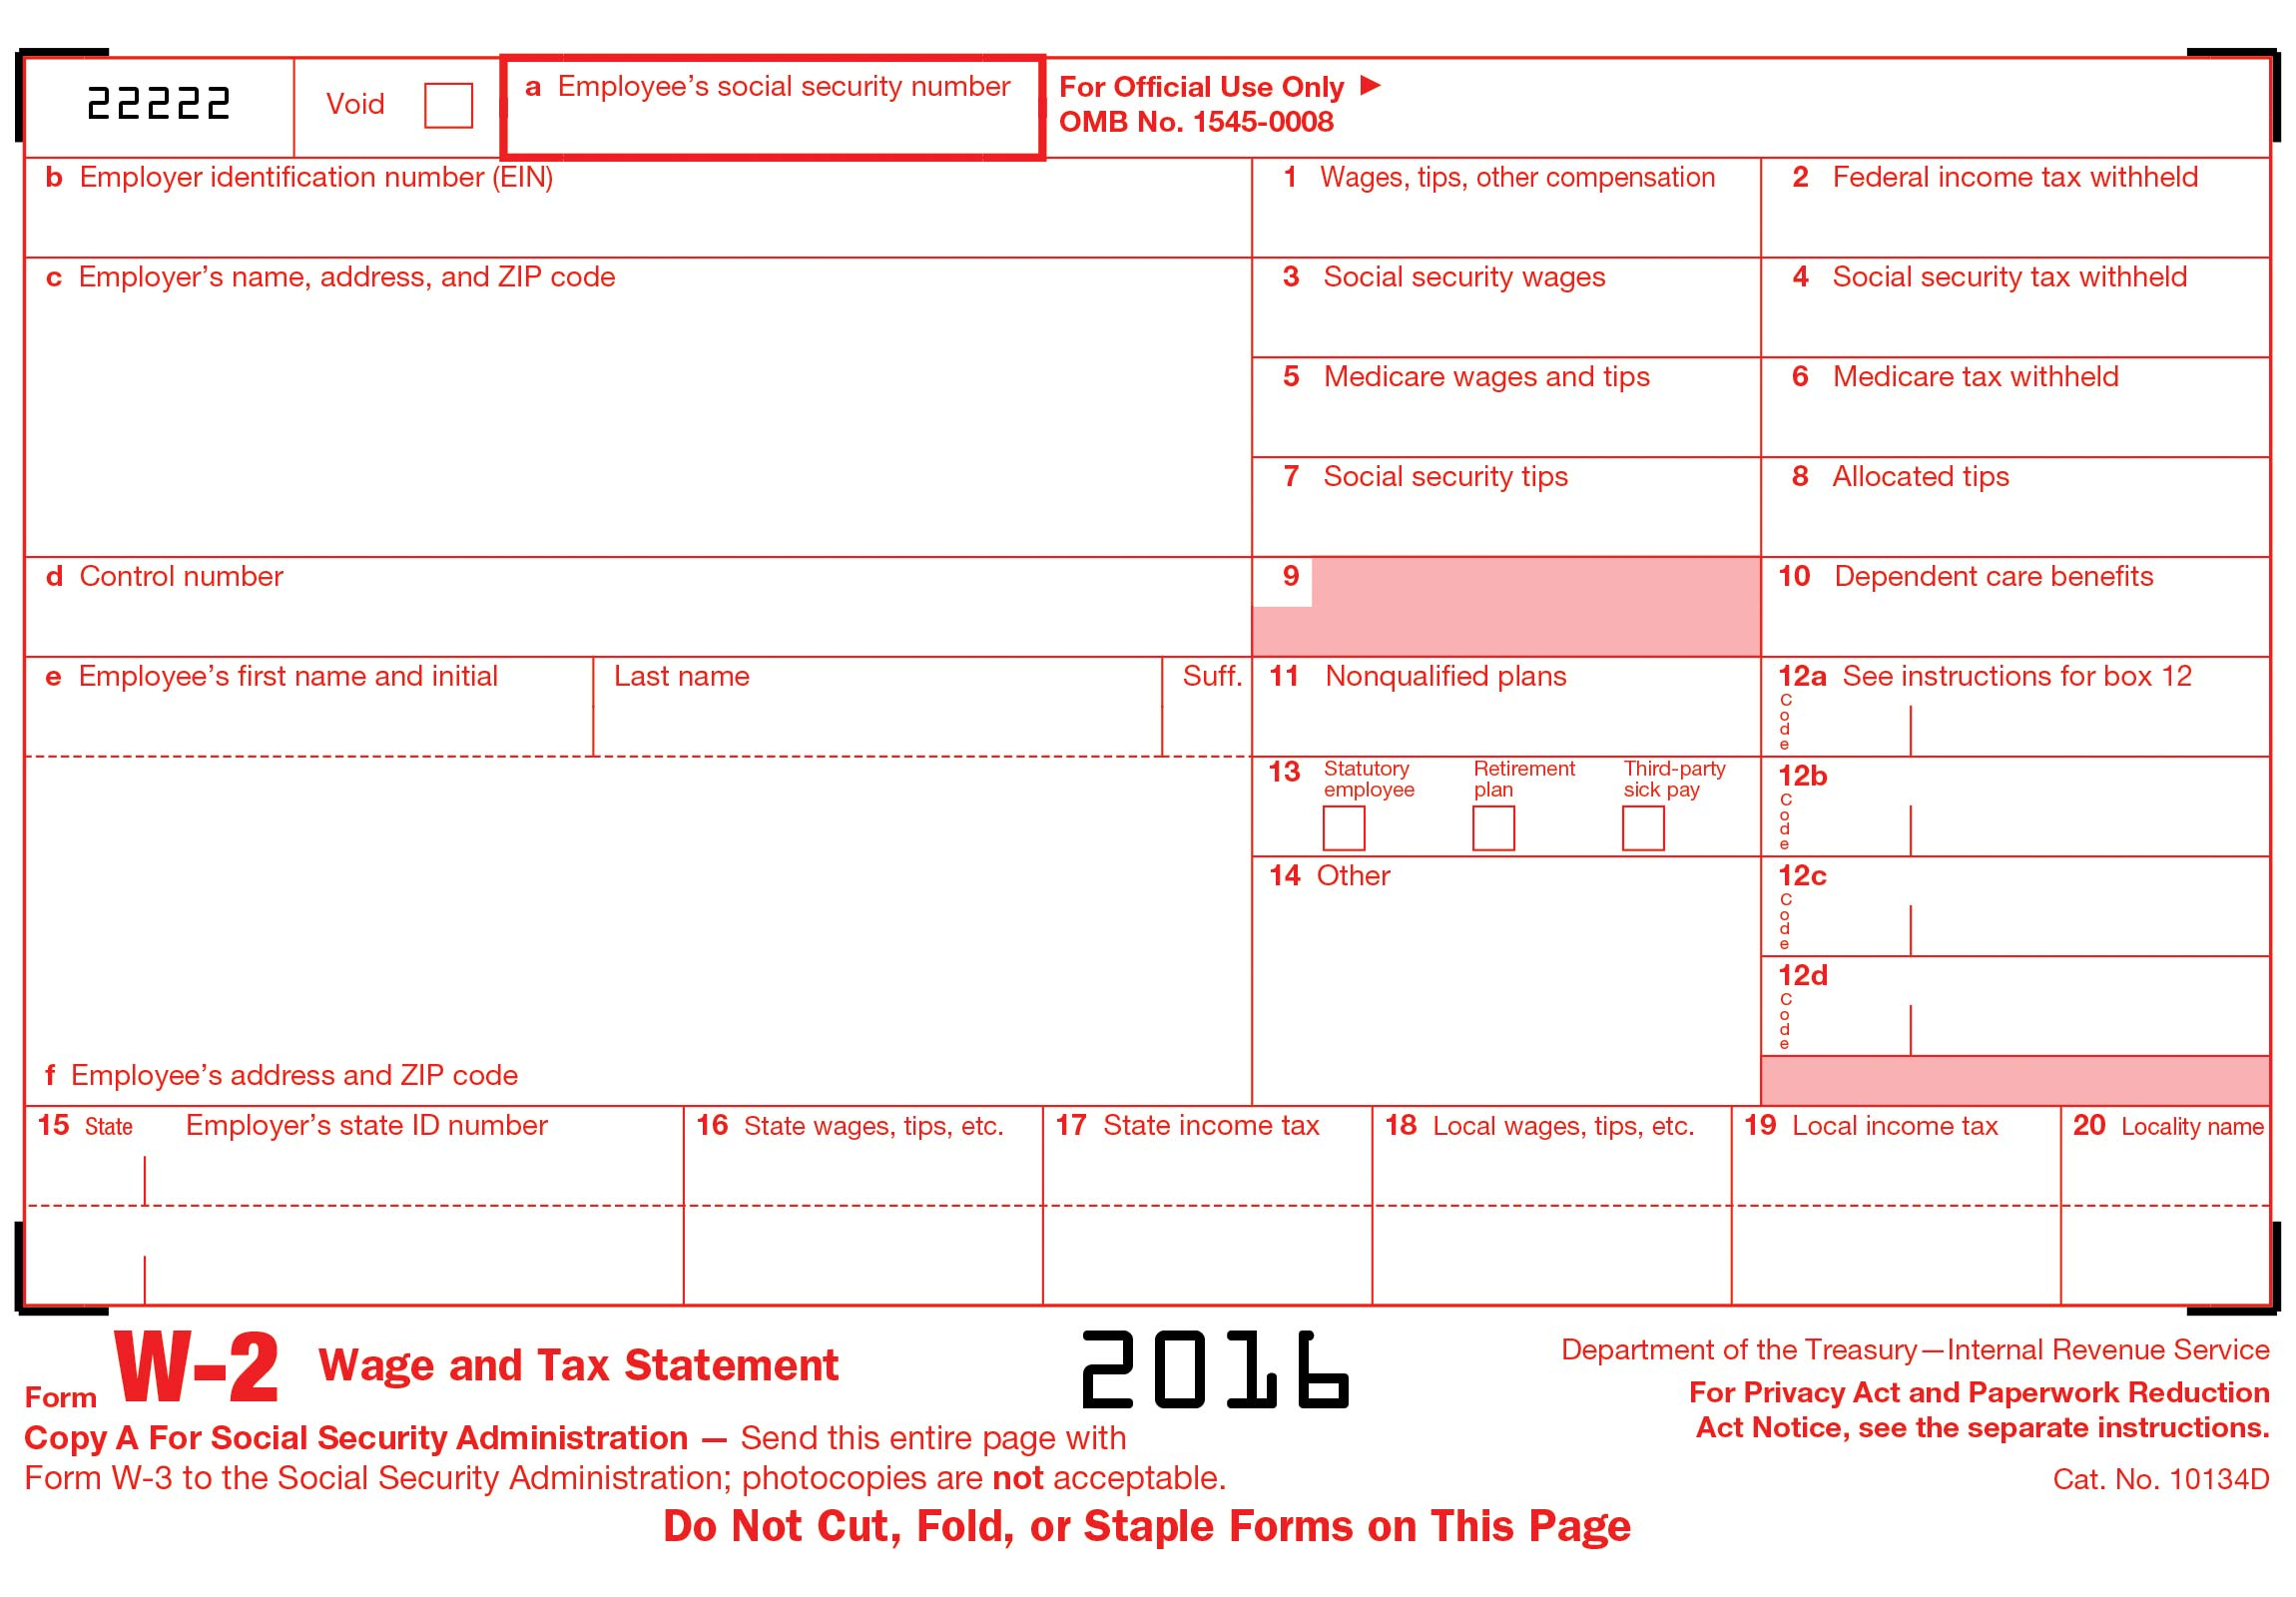 W2 Form 2016 Template | W2 Form Generator Online - Stubcheck within W2 Tax Form 2016